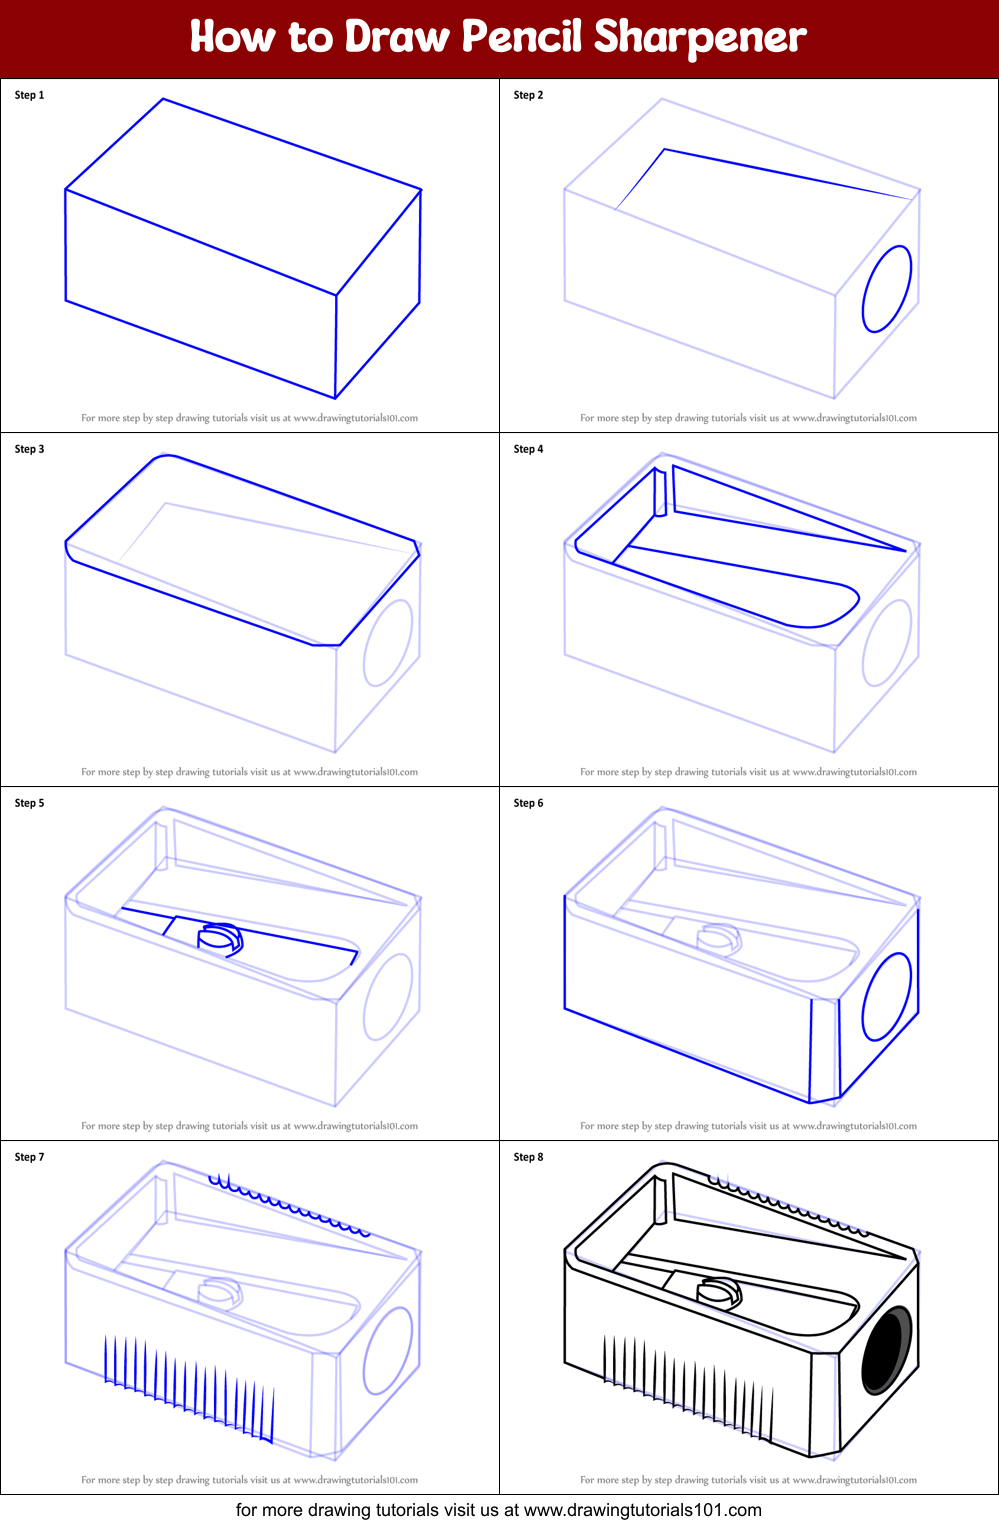 How to Draw Pencil Sharpener step by step